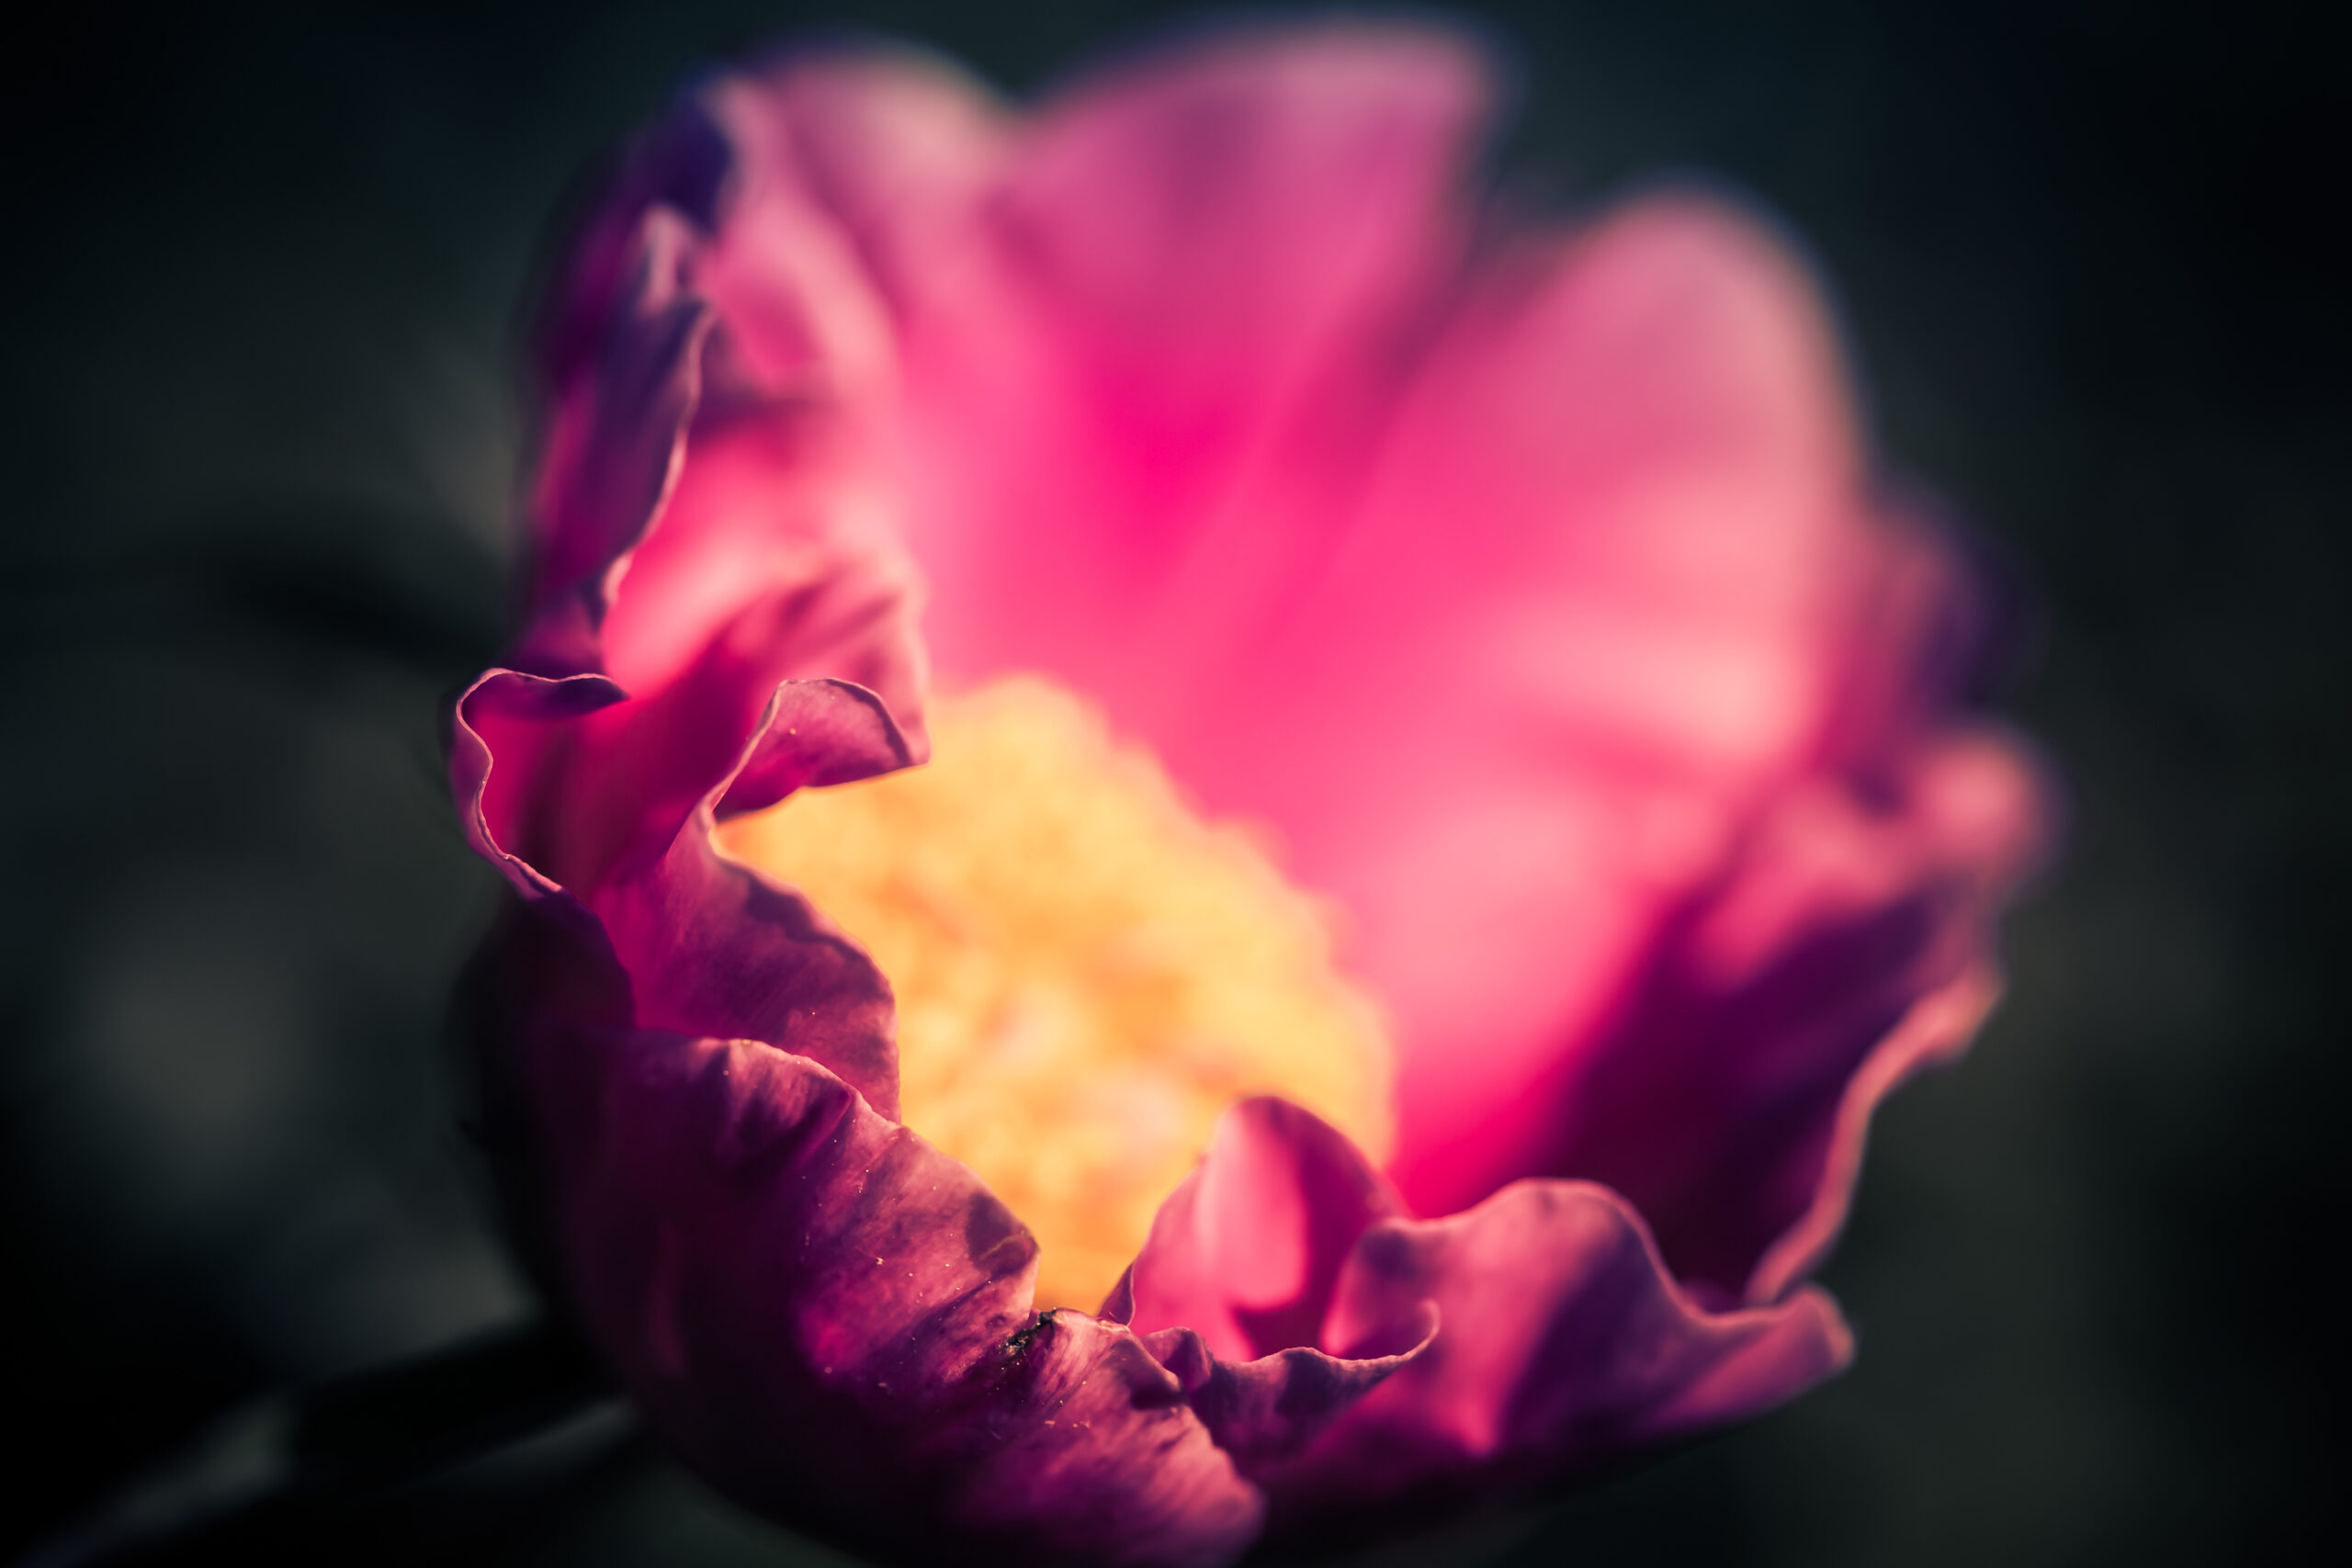 100mm macro photograph of a fresh opened pink peony blossom.